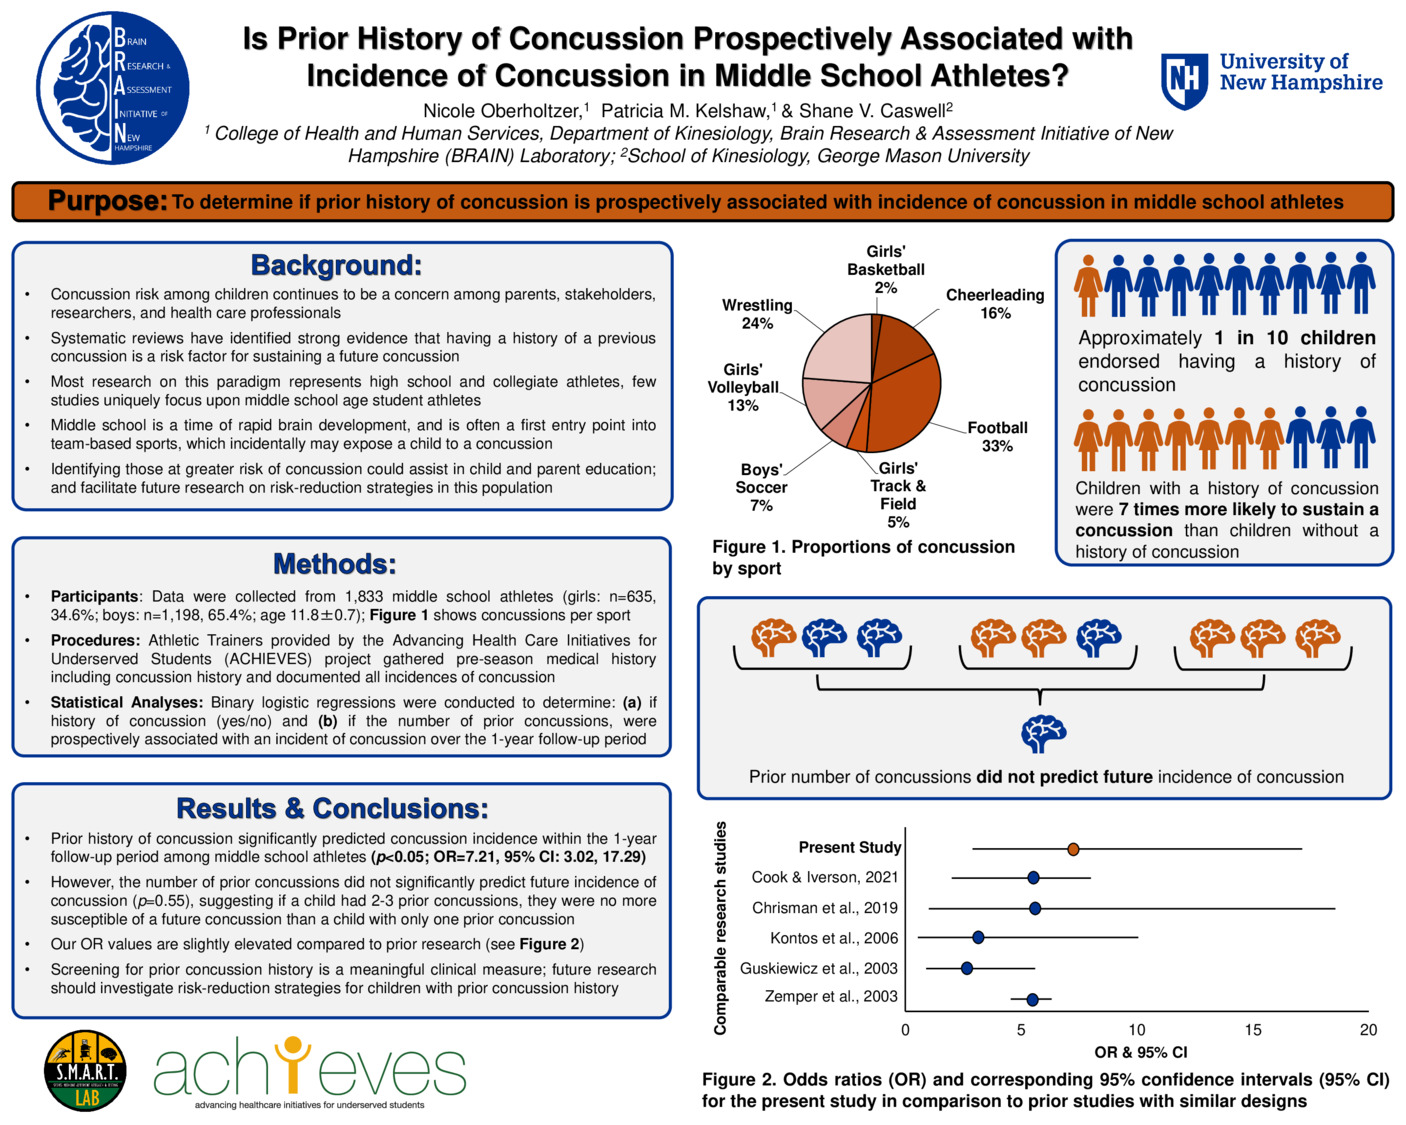 Is Prior History Of Concussion Prospectively Associated With Incidence Of Concussion In Middle School Athletes? by nro1004